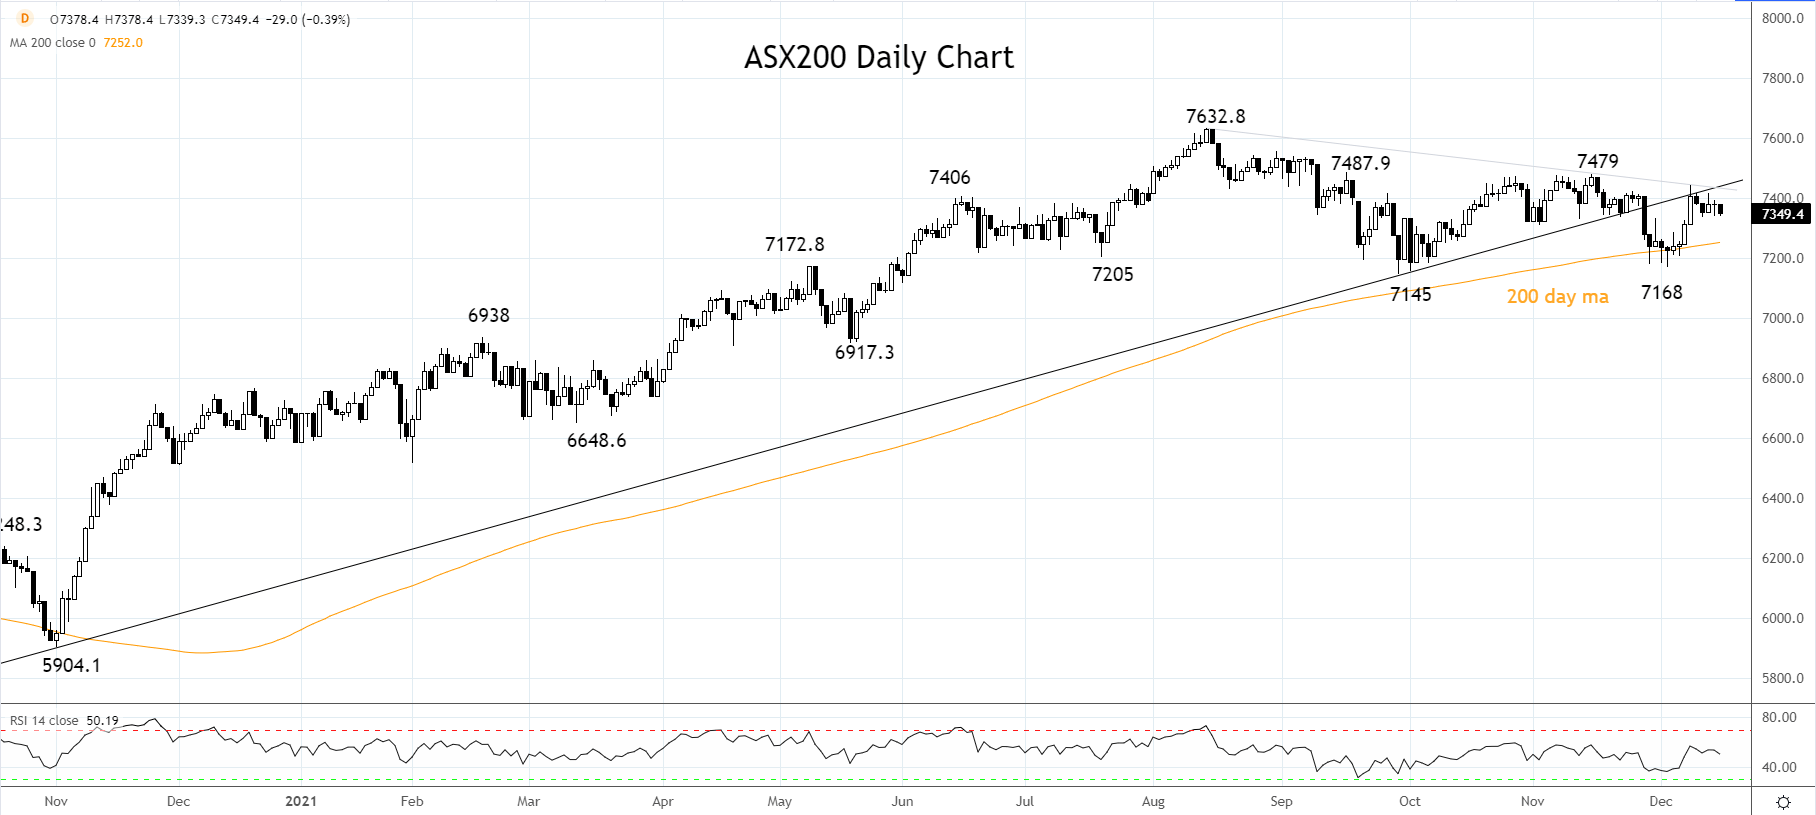 ASX200 Daily Chart 15th of Dec